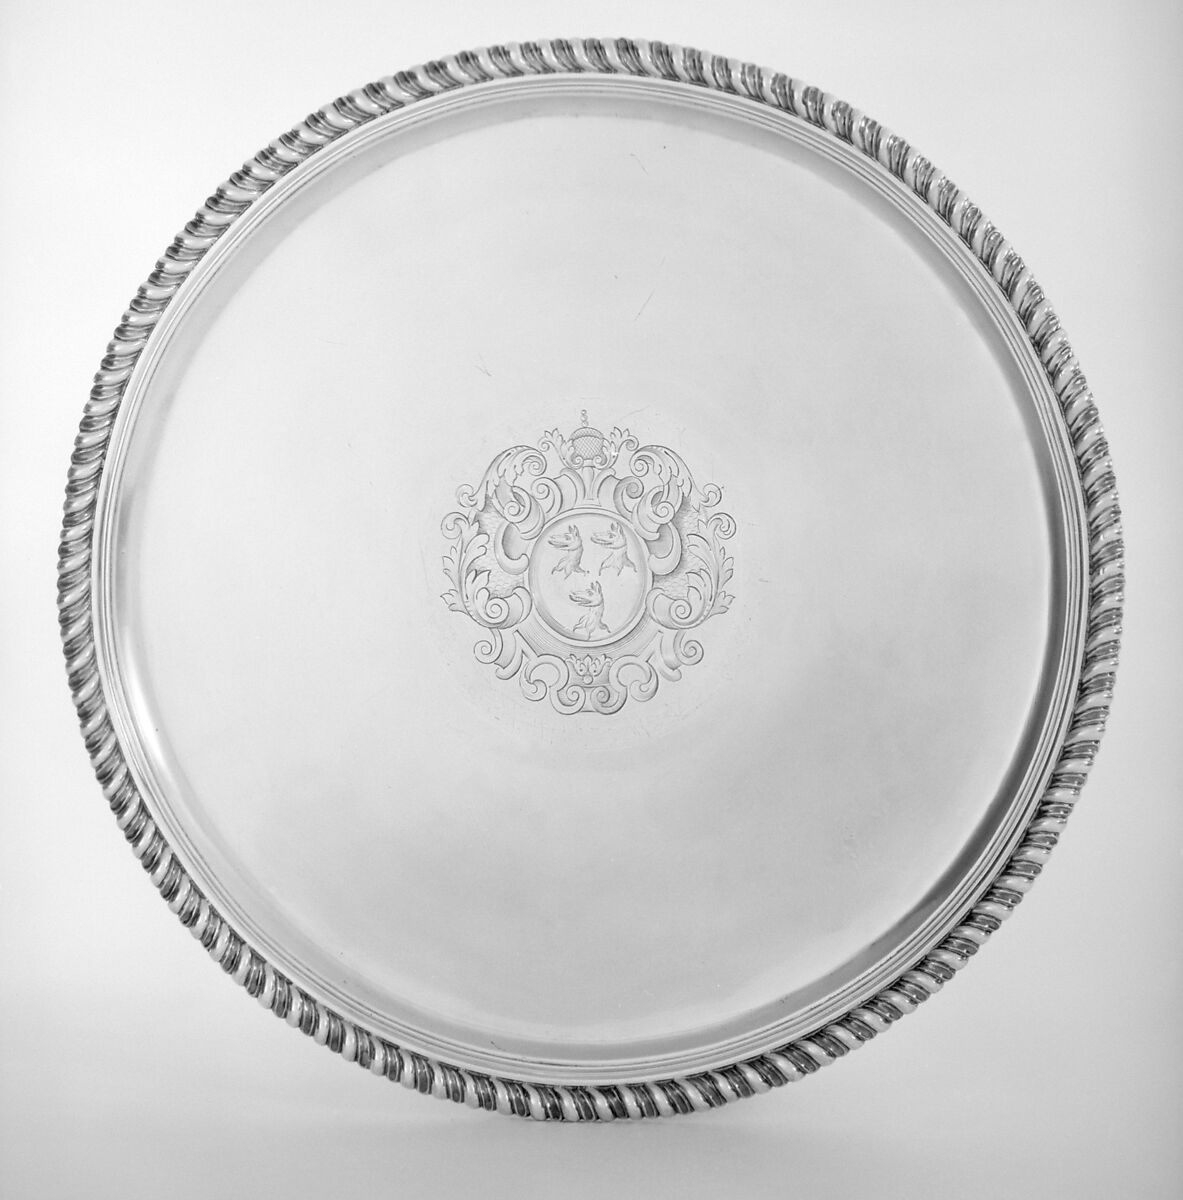 Salver (one of a pair), Andrew Moore (free 1664), Silver gilt, British, London 